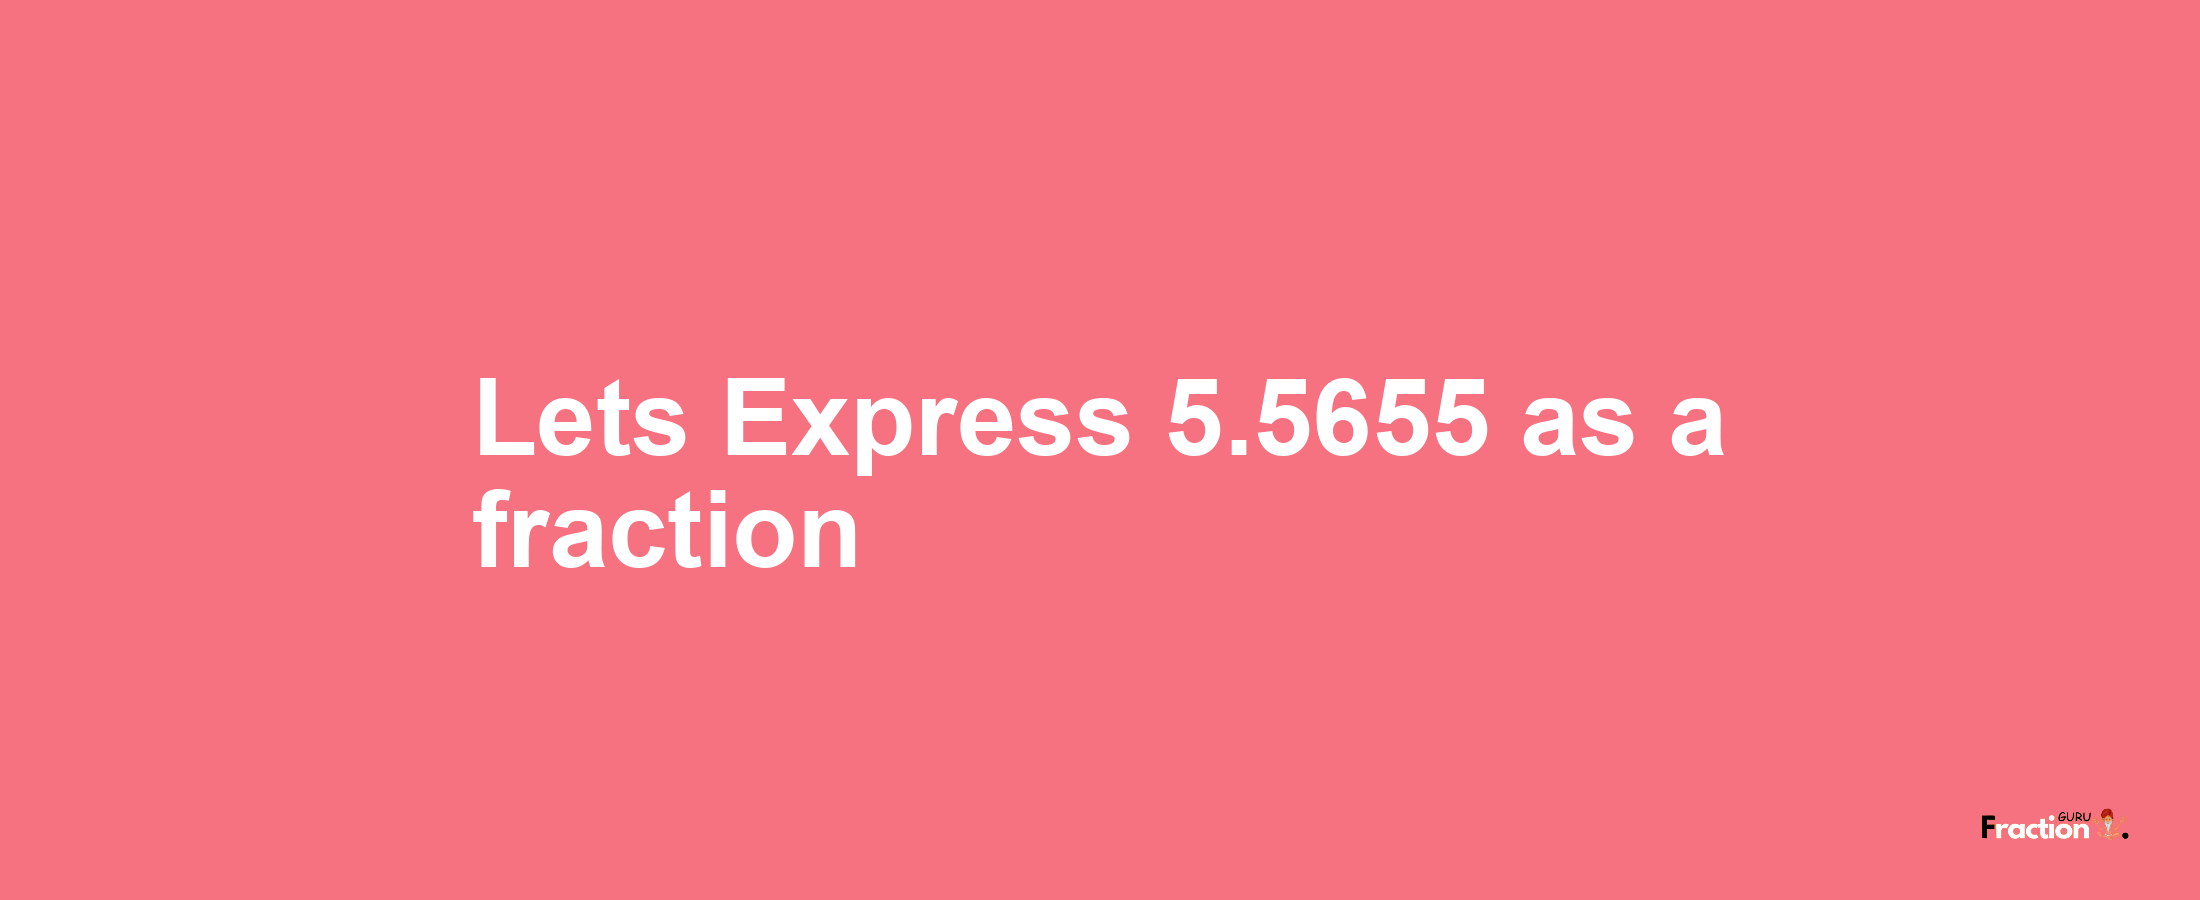 Lets Express 5.5655 as afraction